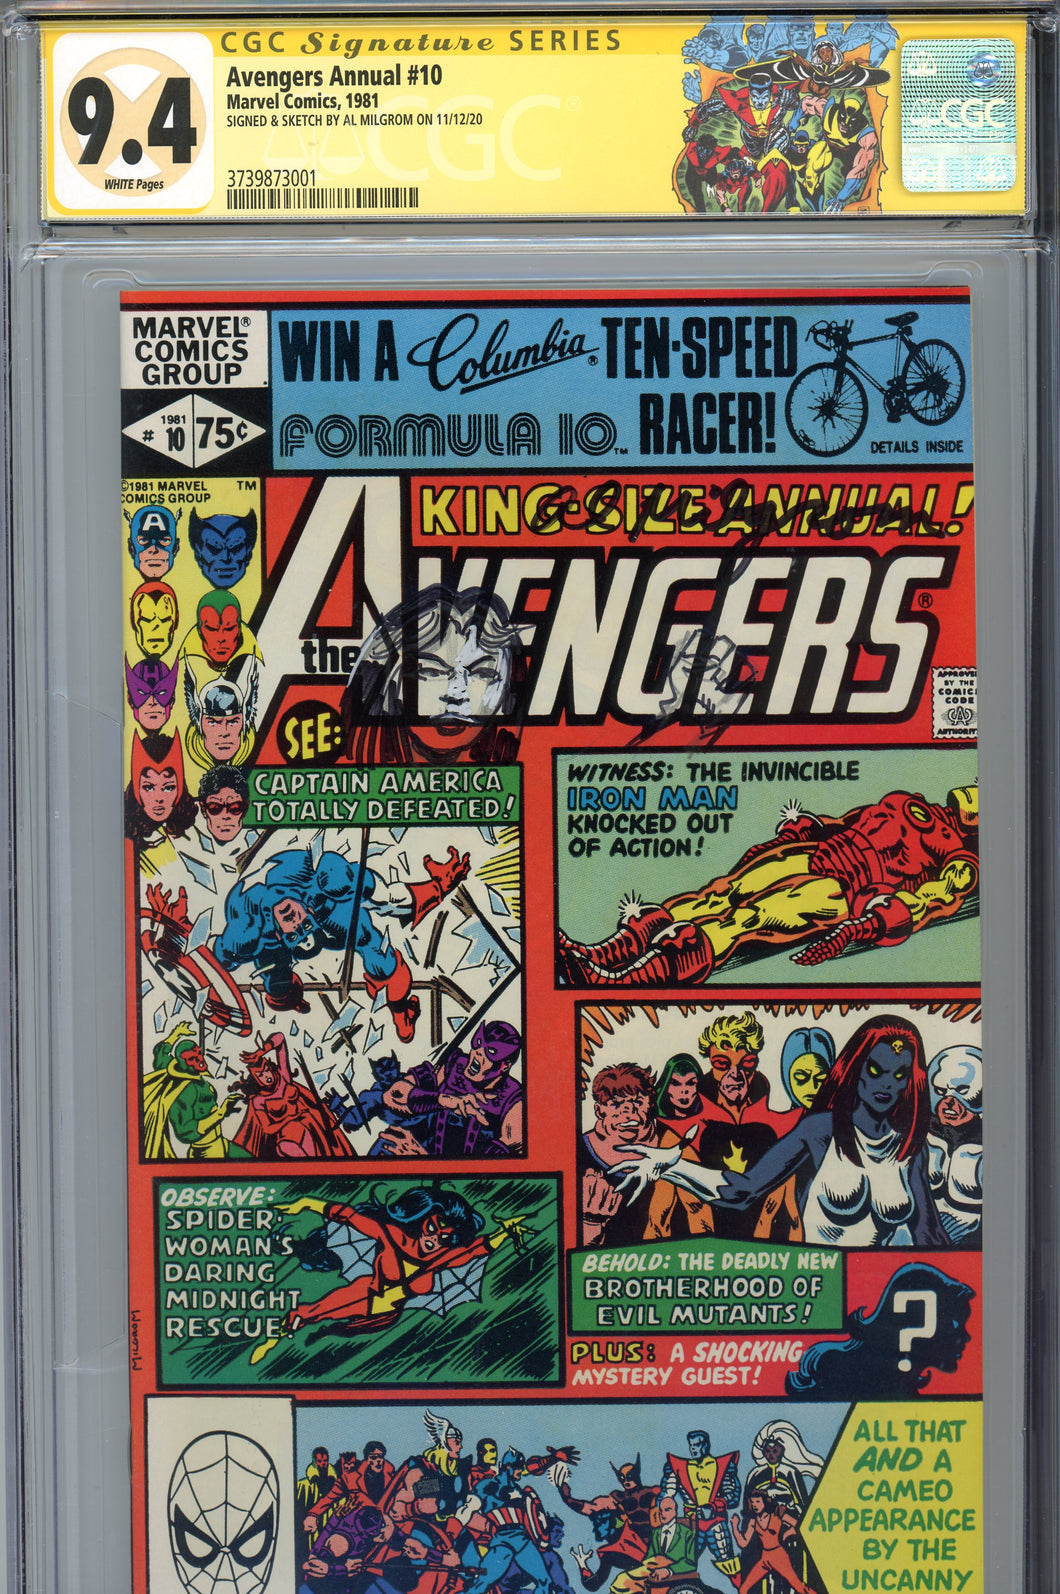 Avengers Annual #10 CGC 9.4 SS Signed Remarked Milgrom